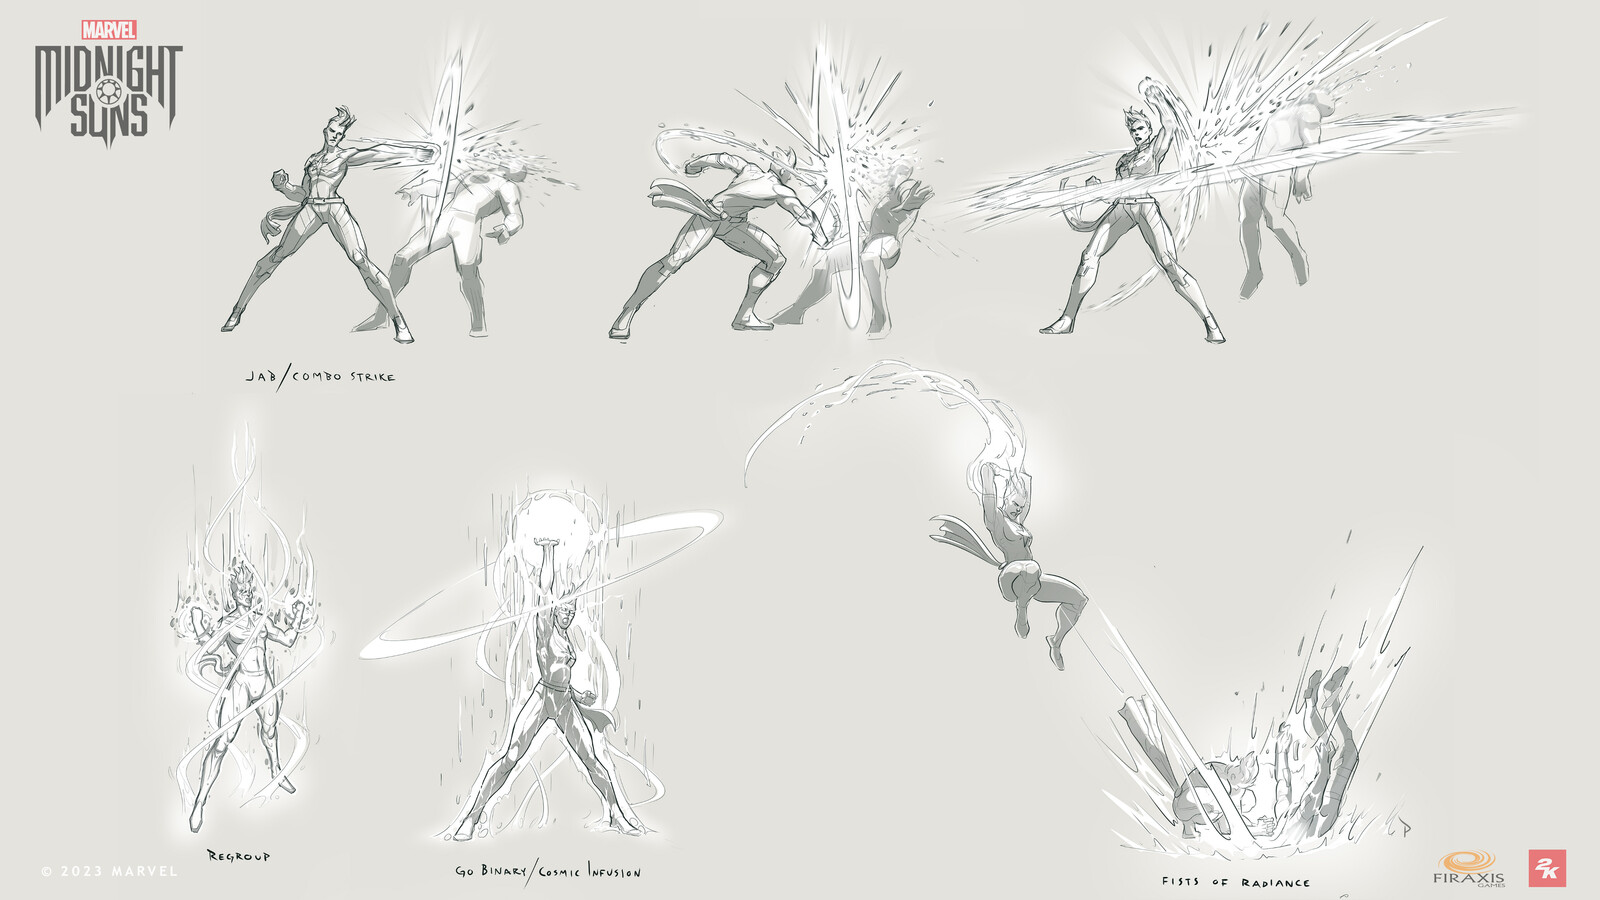 Some more sketches of Captain Marvel's abilities